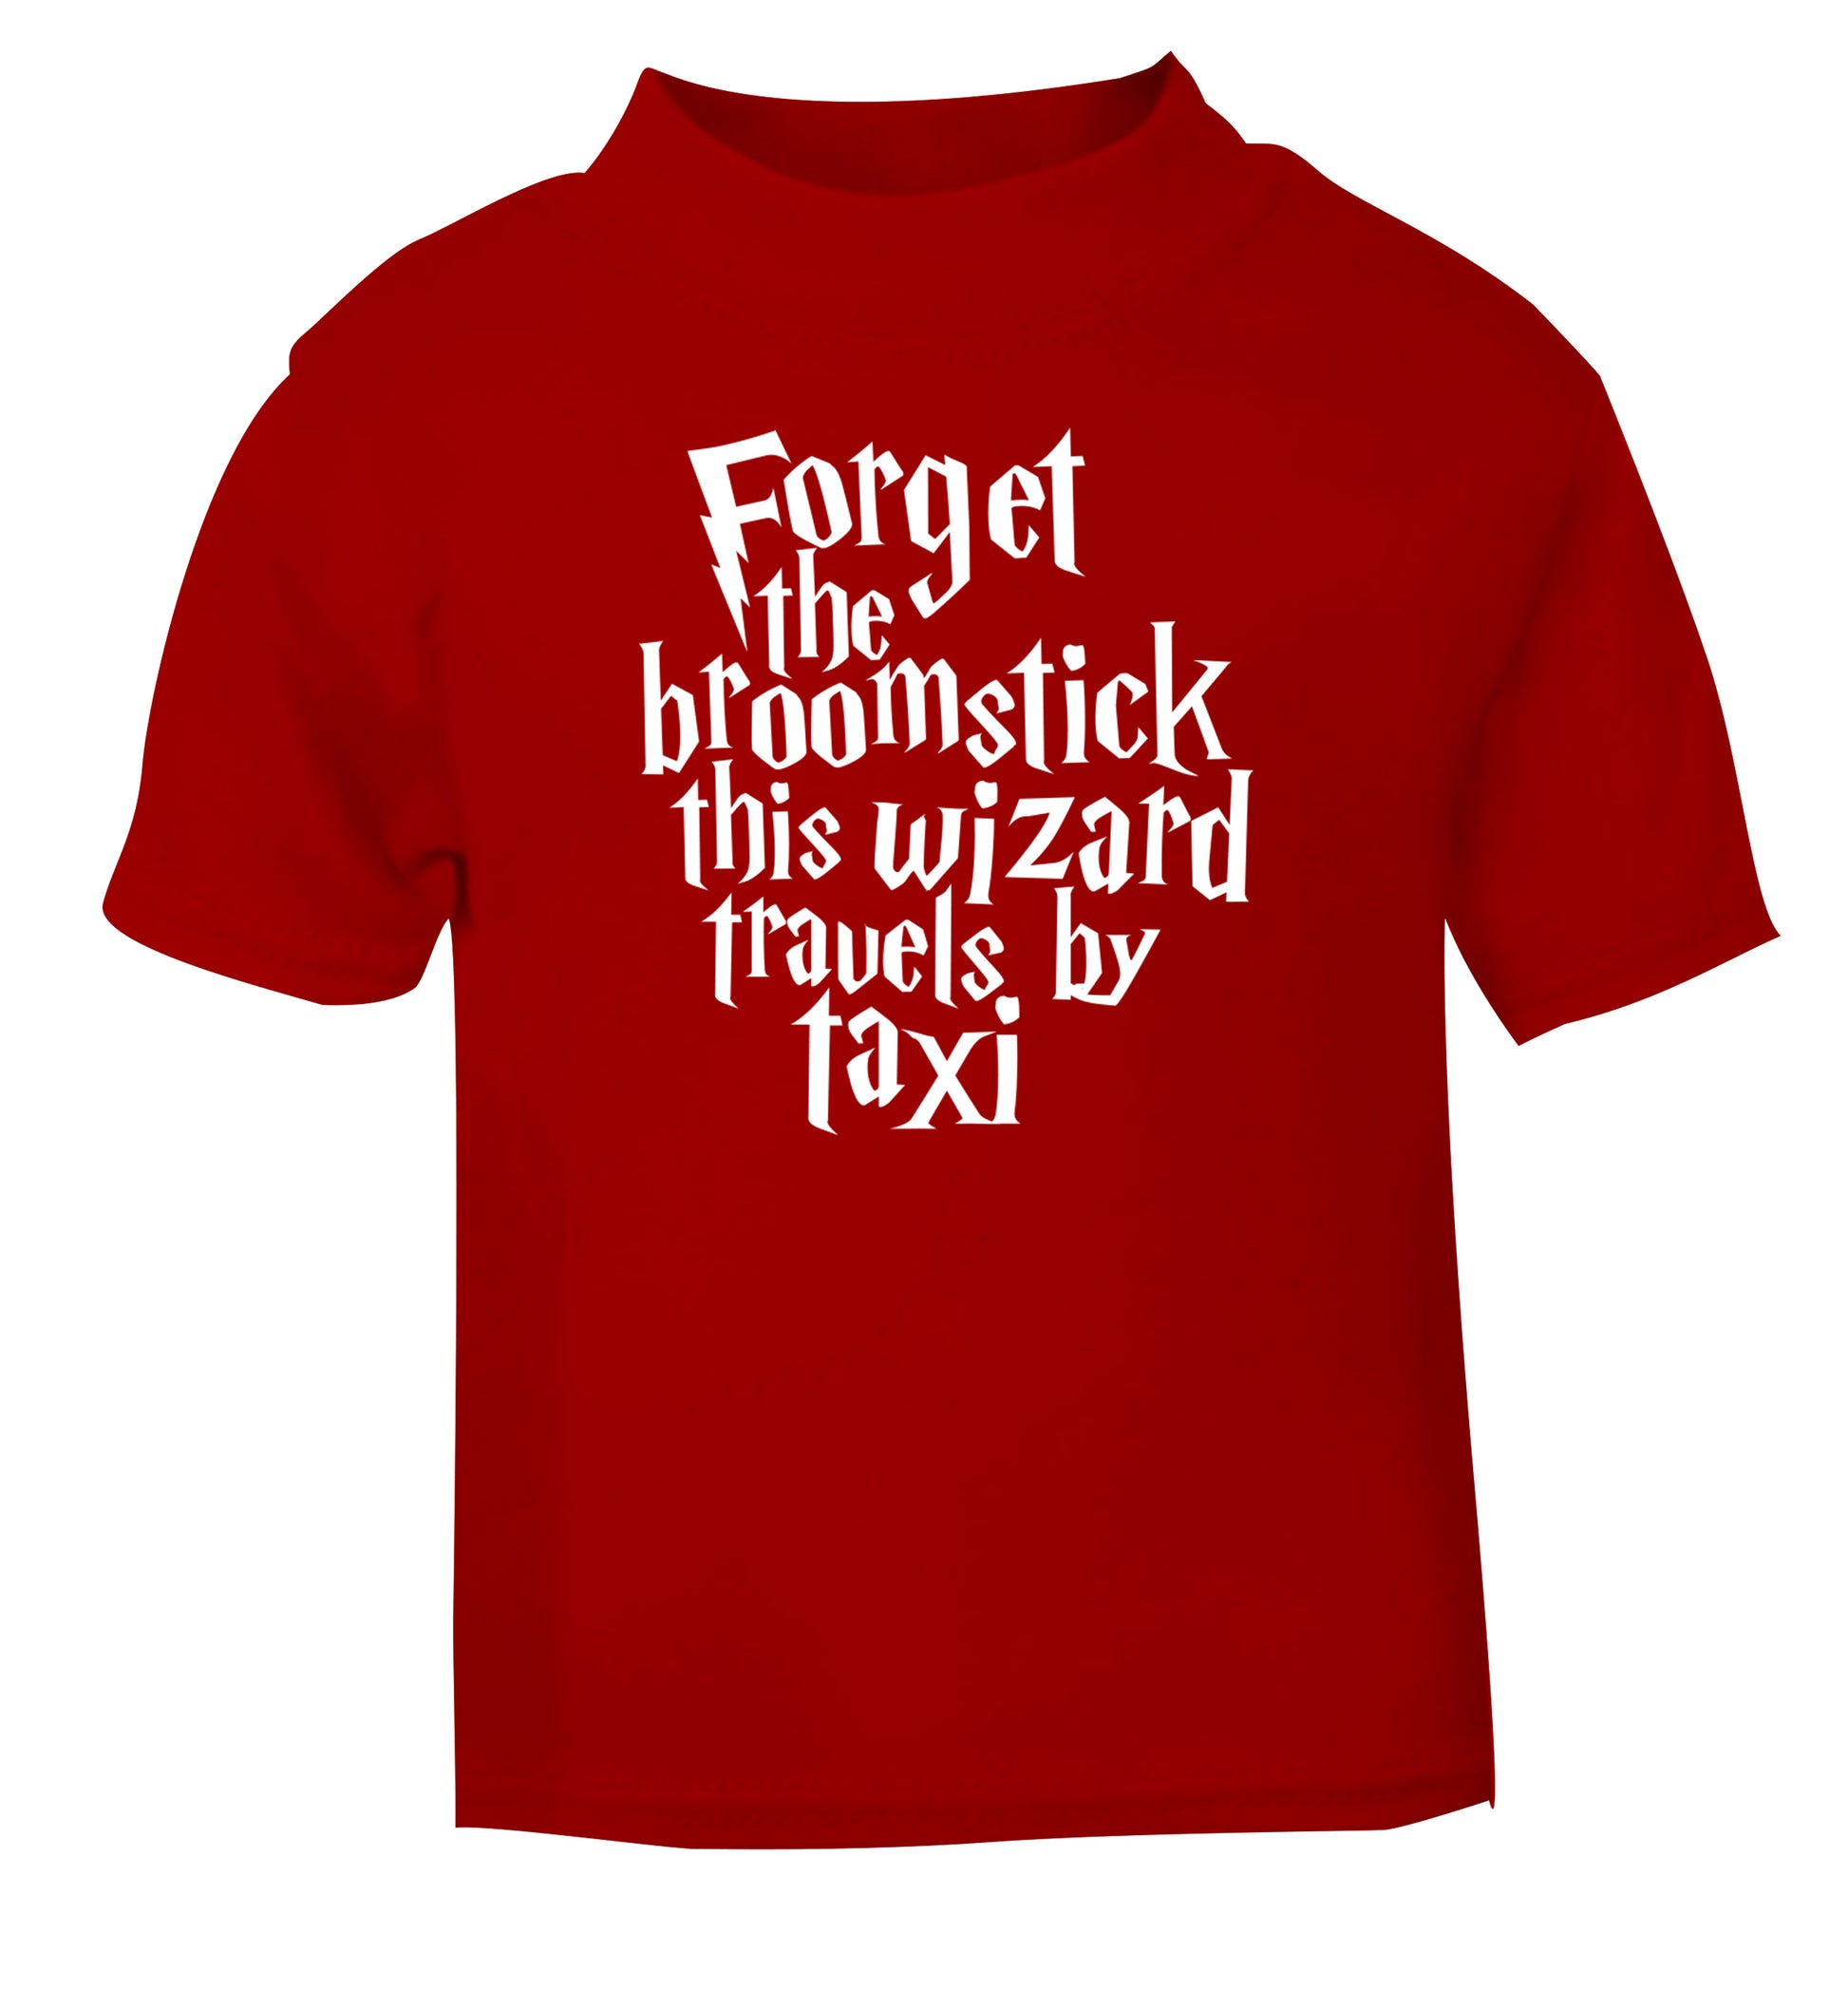 Forget the broomstick this wizard travels by taxi red Baby Toddler Tshirt 2 Years